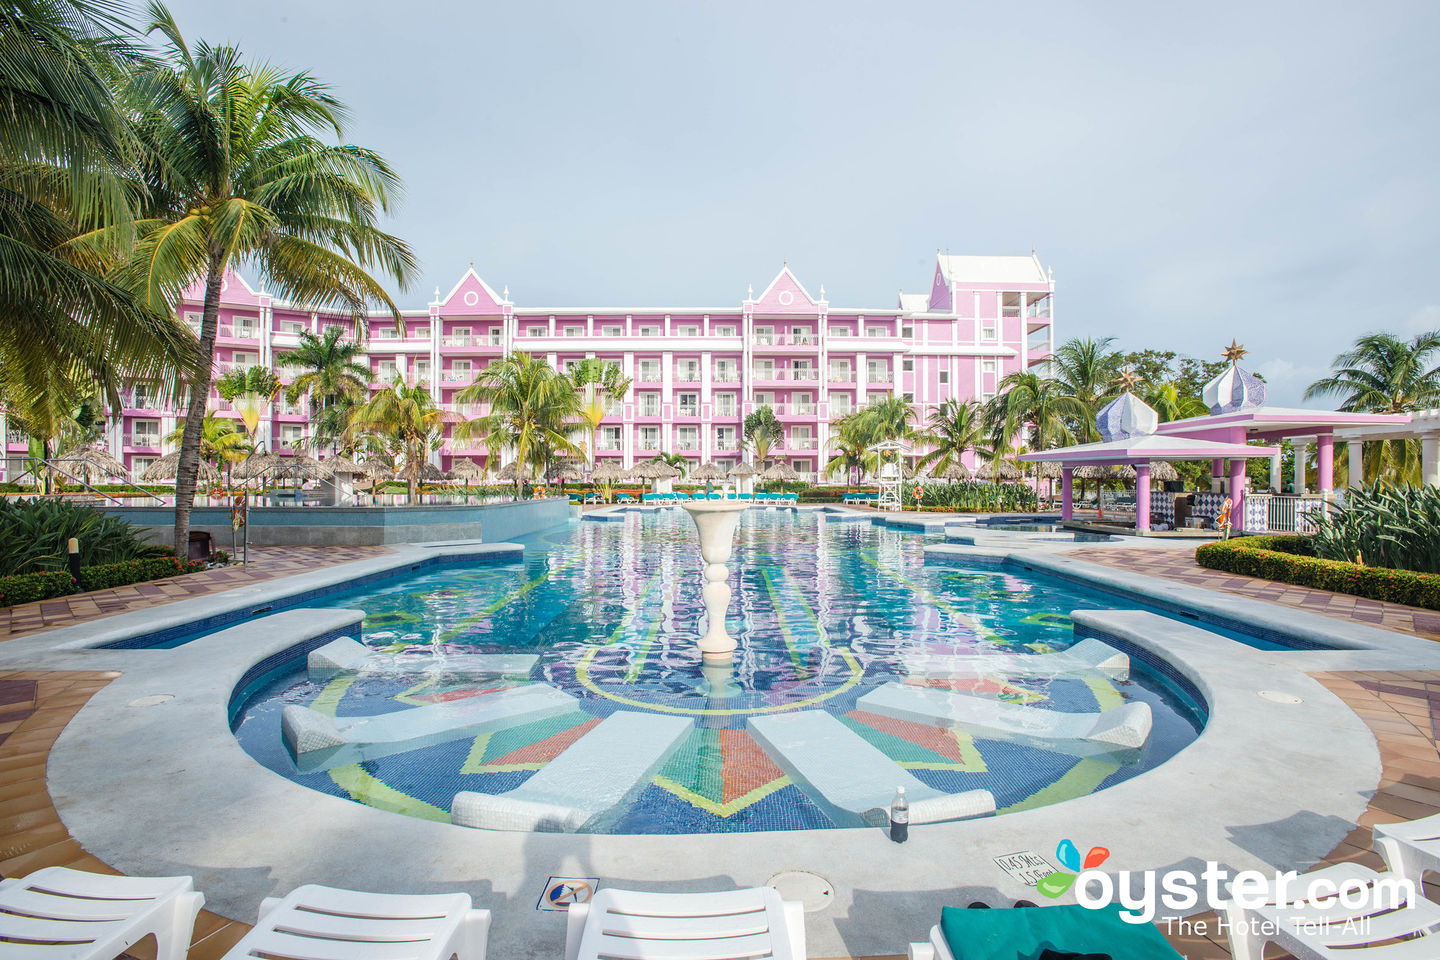 Hotel Riu Ocho Rios Review What To REALLY Expect If You Stay